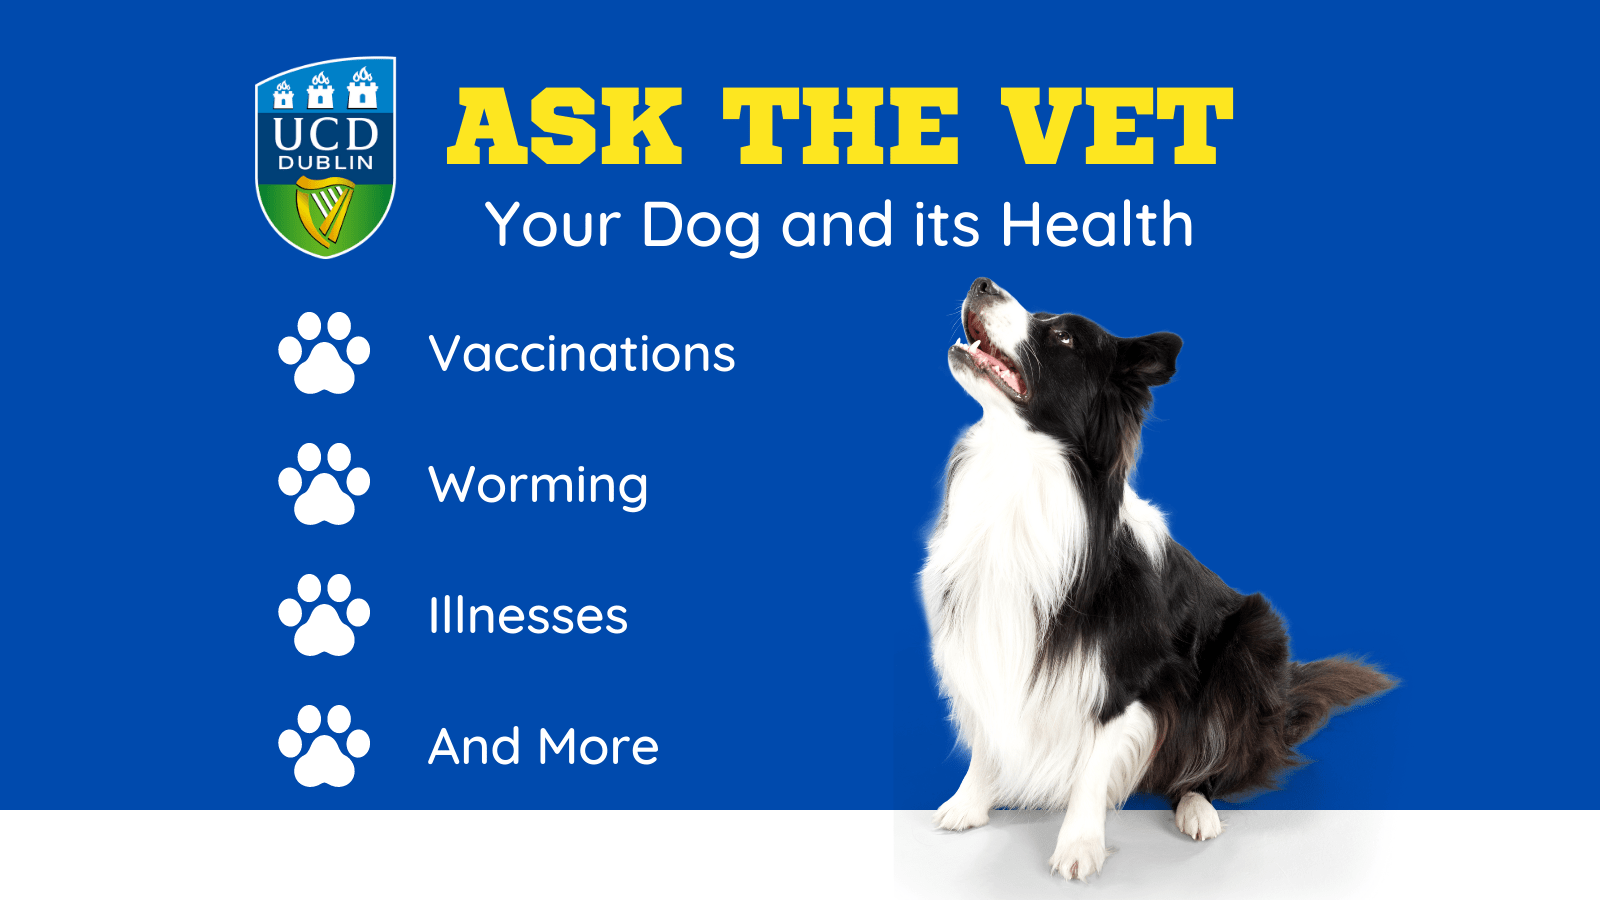 A free event for UCD alumni to find out more about their dogs health from UCD Vets